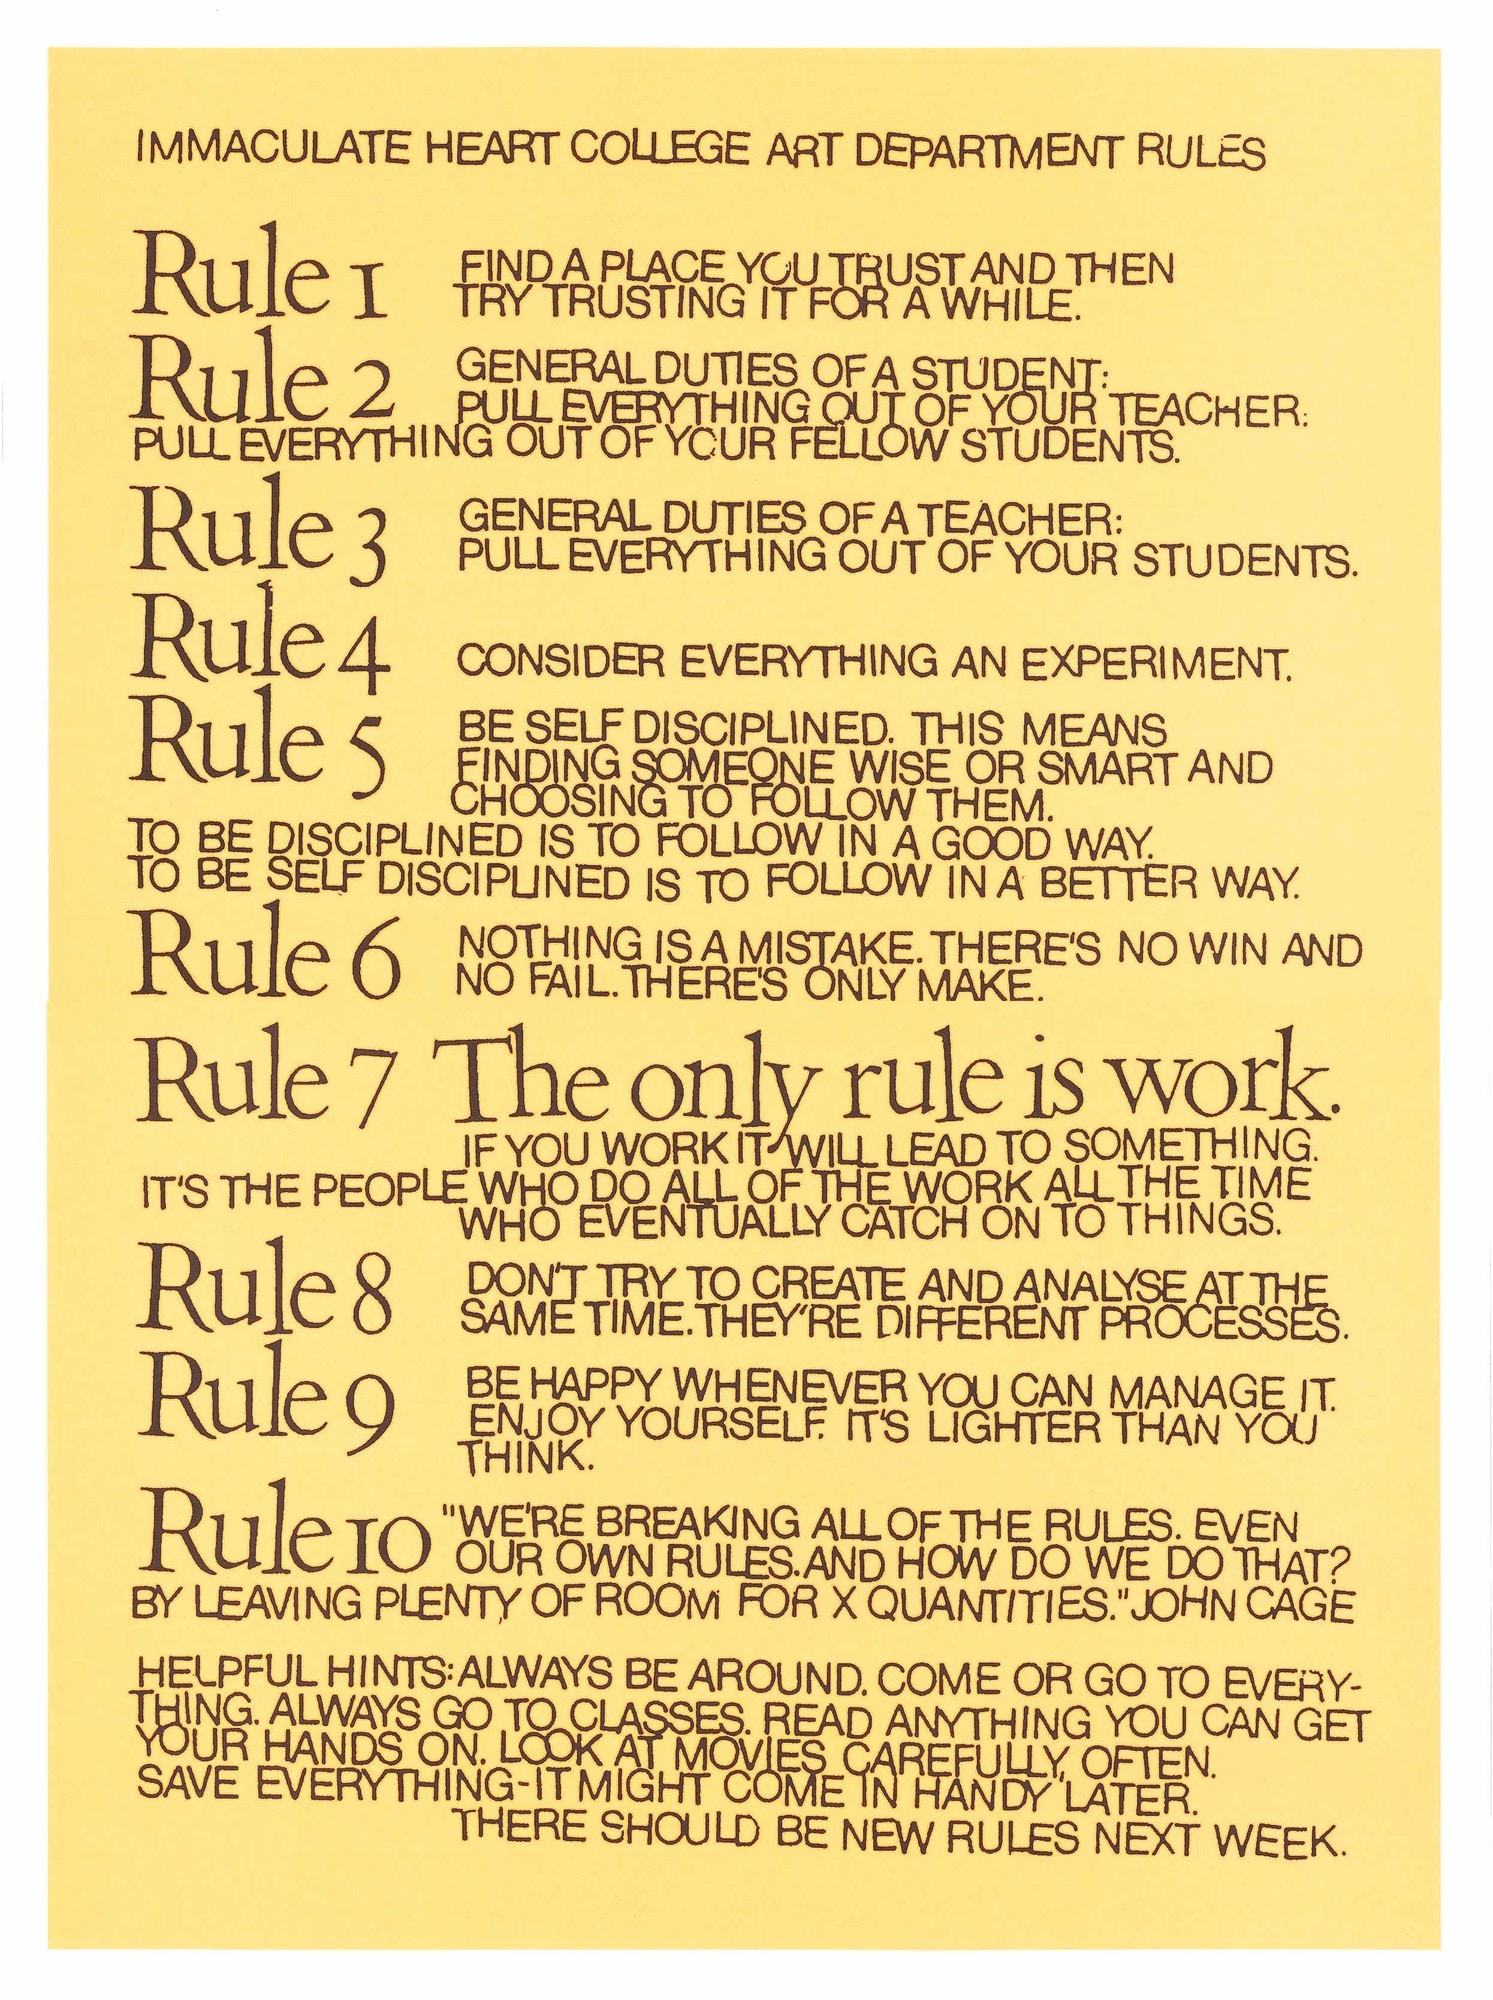 Corita's rules for artists